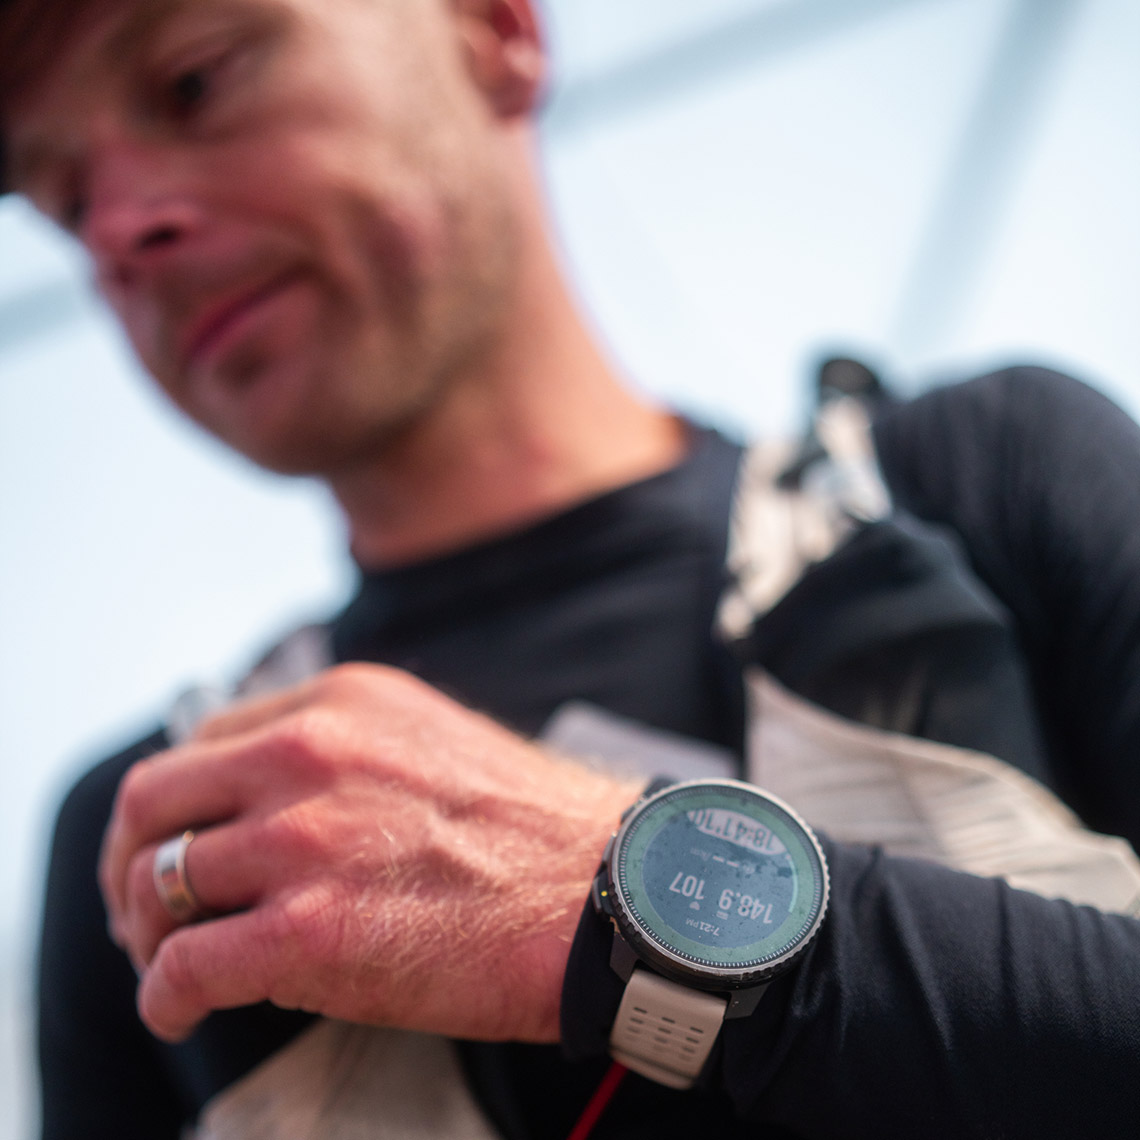 Christian won the TDS with a Suunto Vertical GPS watch.